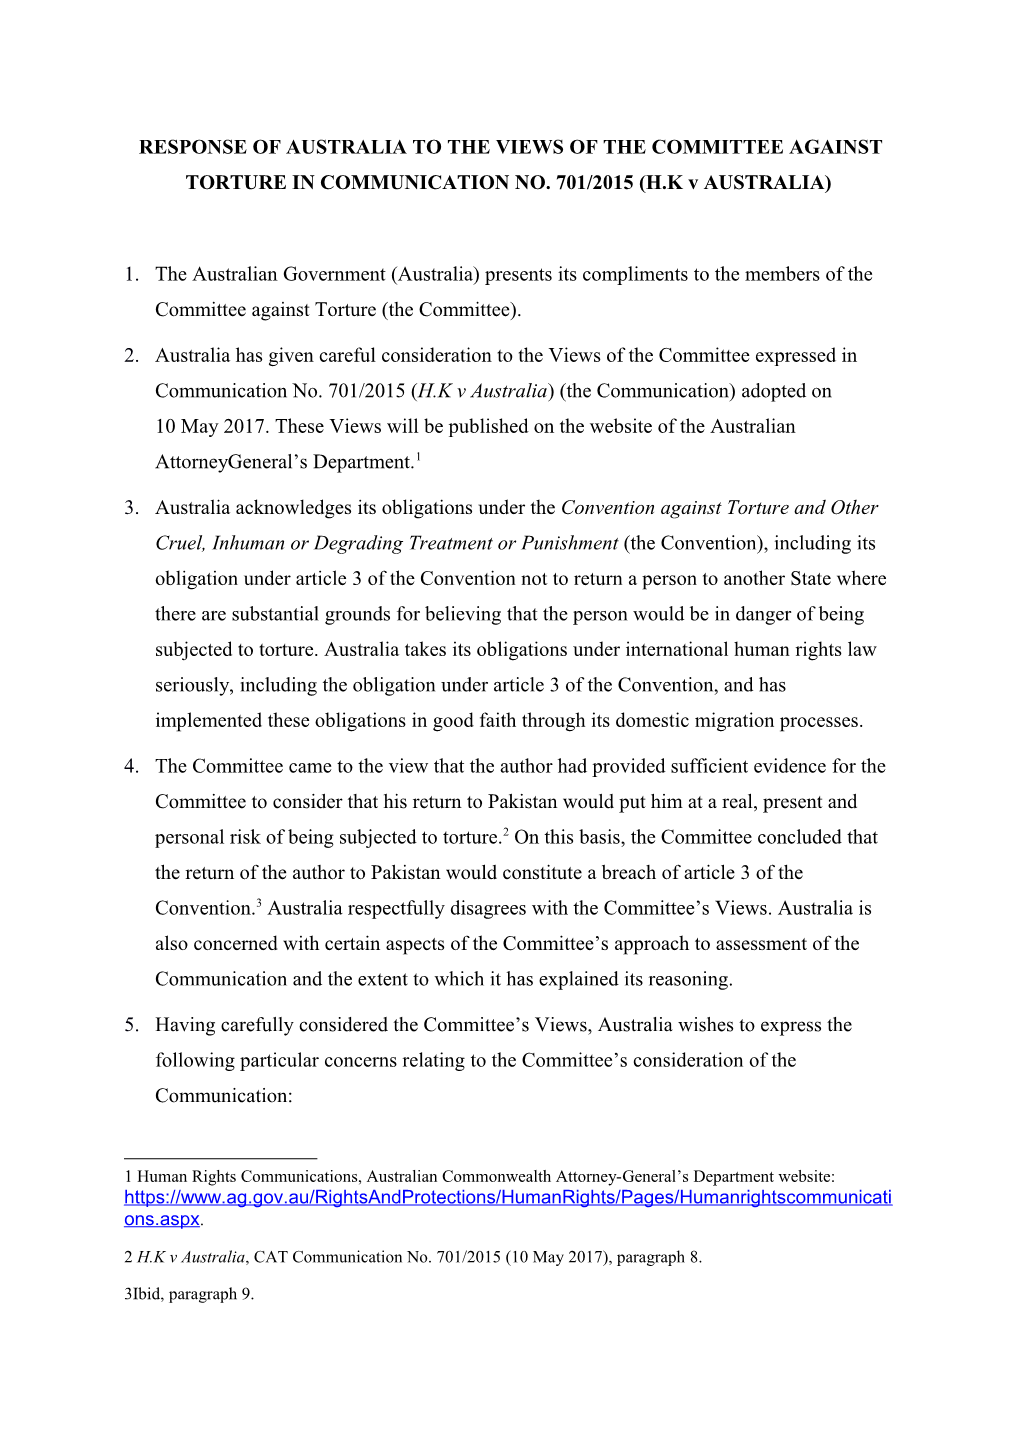 Response of Australia to the Views of the Committee Against Torture in Communication No